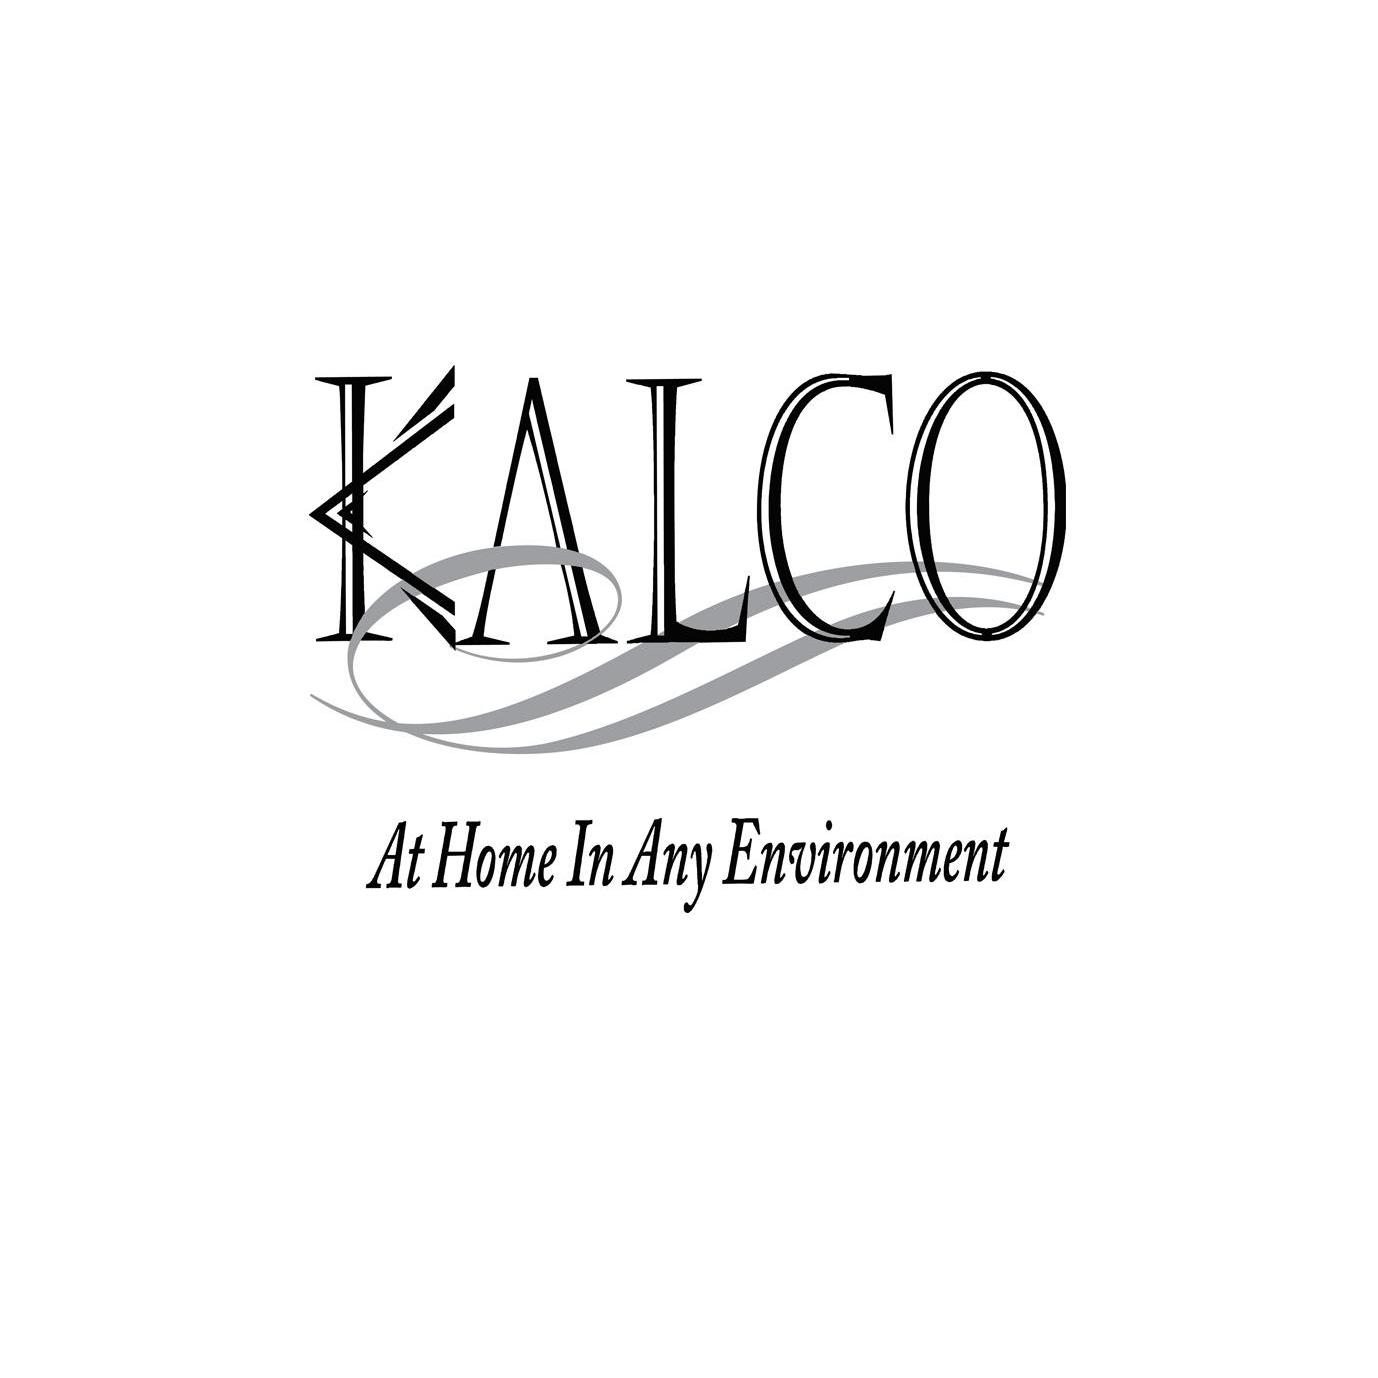 KALCO AT HOME IN ANY ENVIRONMENT